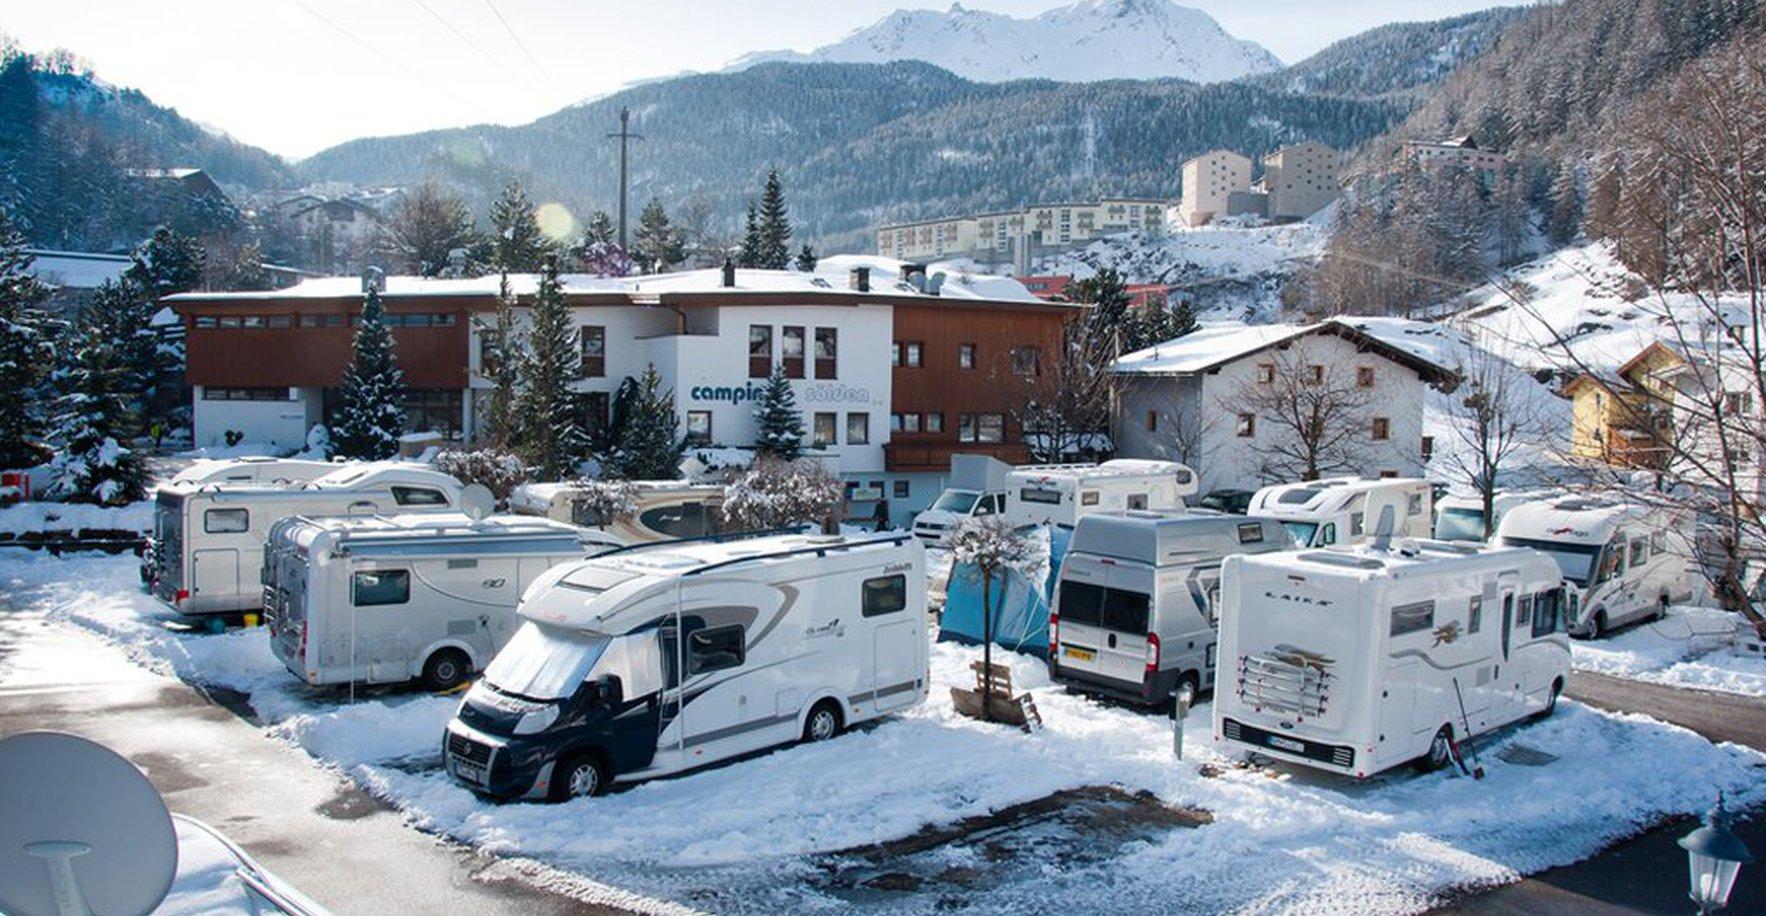 How should a motorhome be equipped for winter travel? – image 4